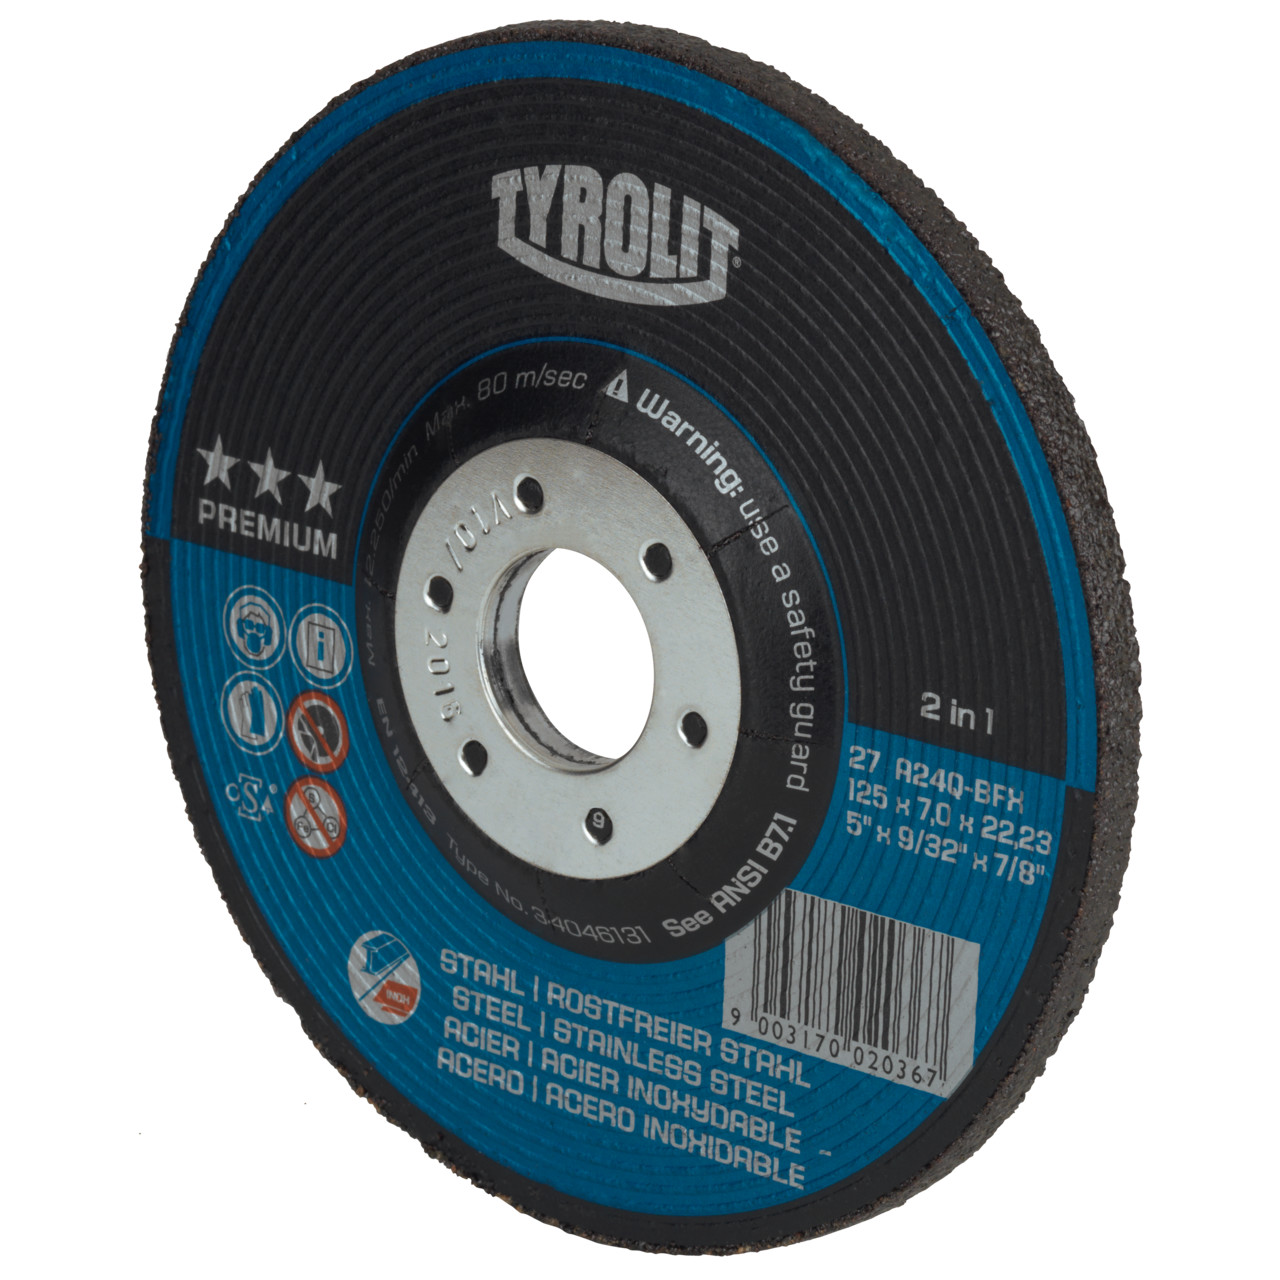 Tyrolit Roughing disc DxUxH 125x4x22.23 2in1 for steel and stainless steel, shape: 27 - offset version, Art. 5308